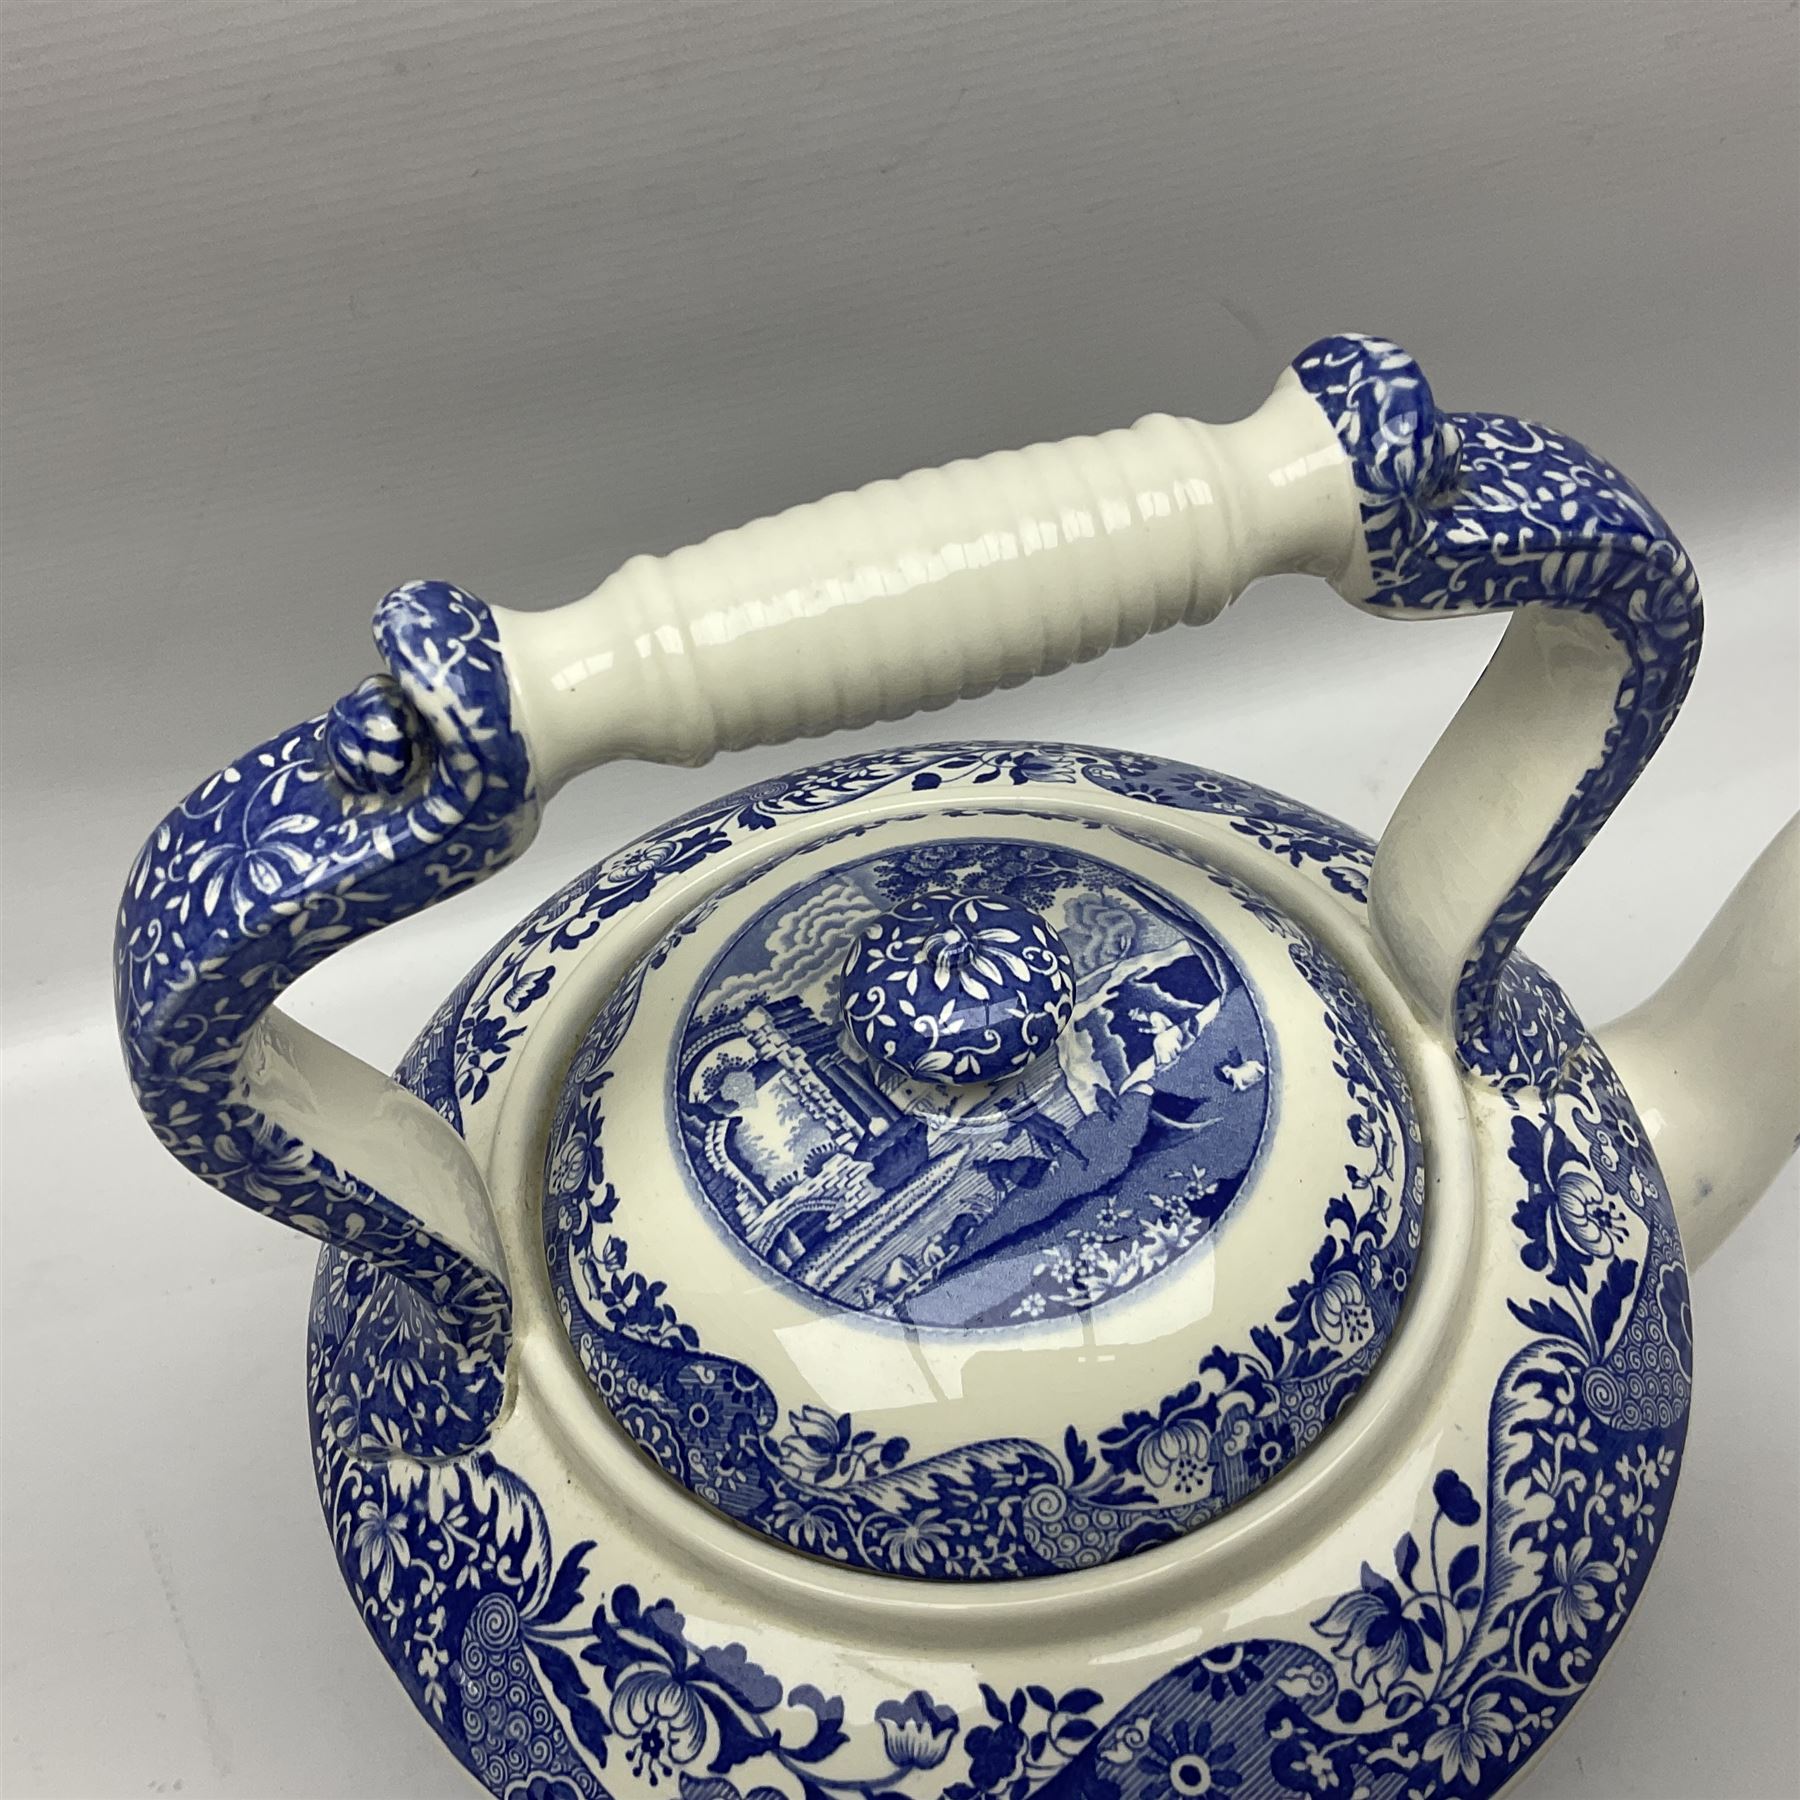 Spode blue and white kettle - Image 2 of 12